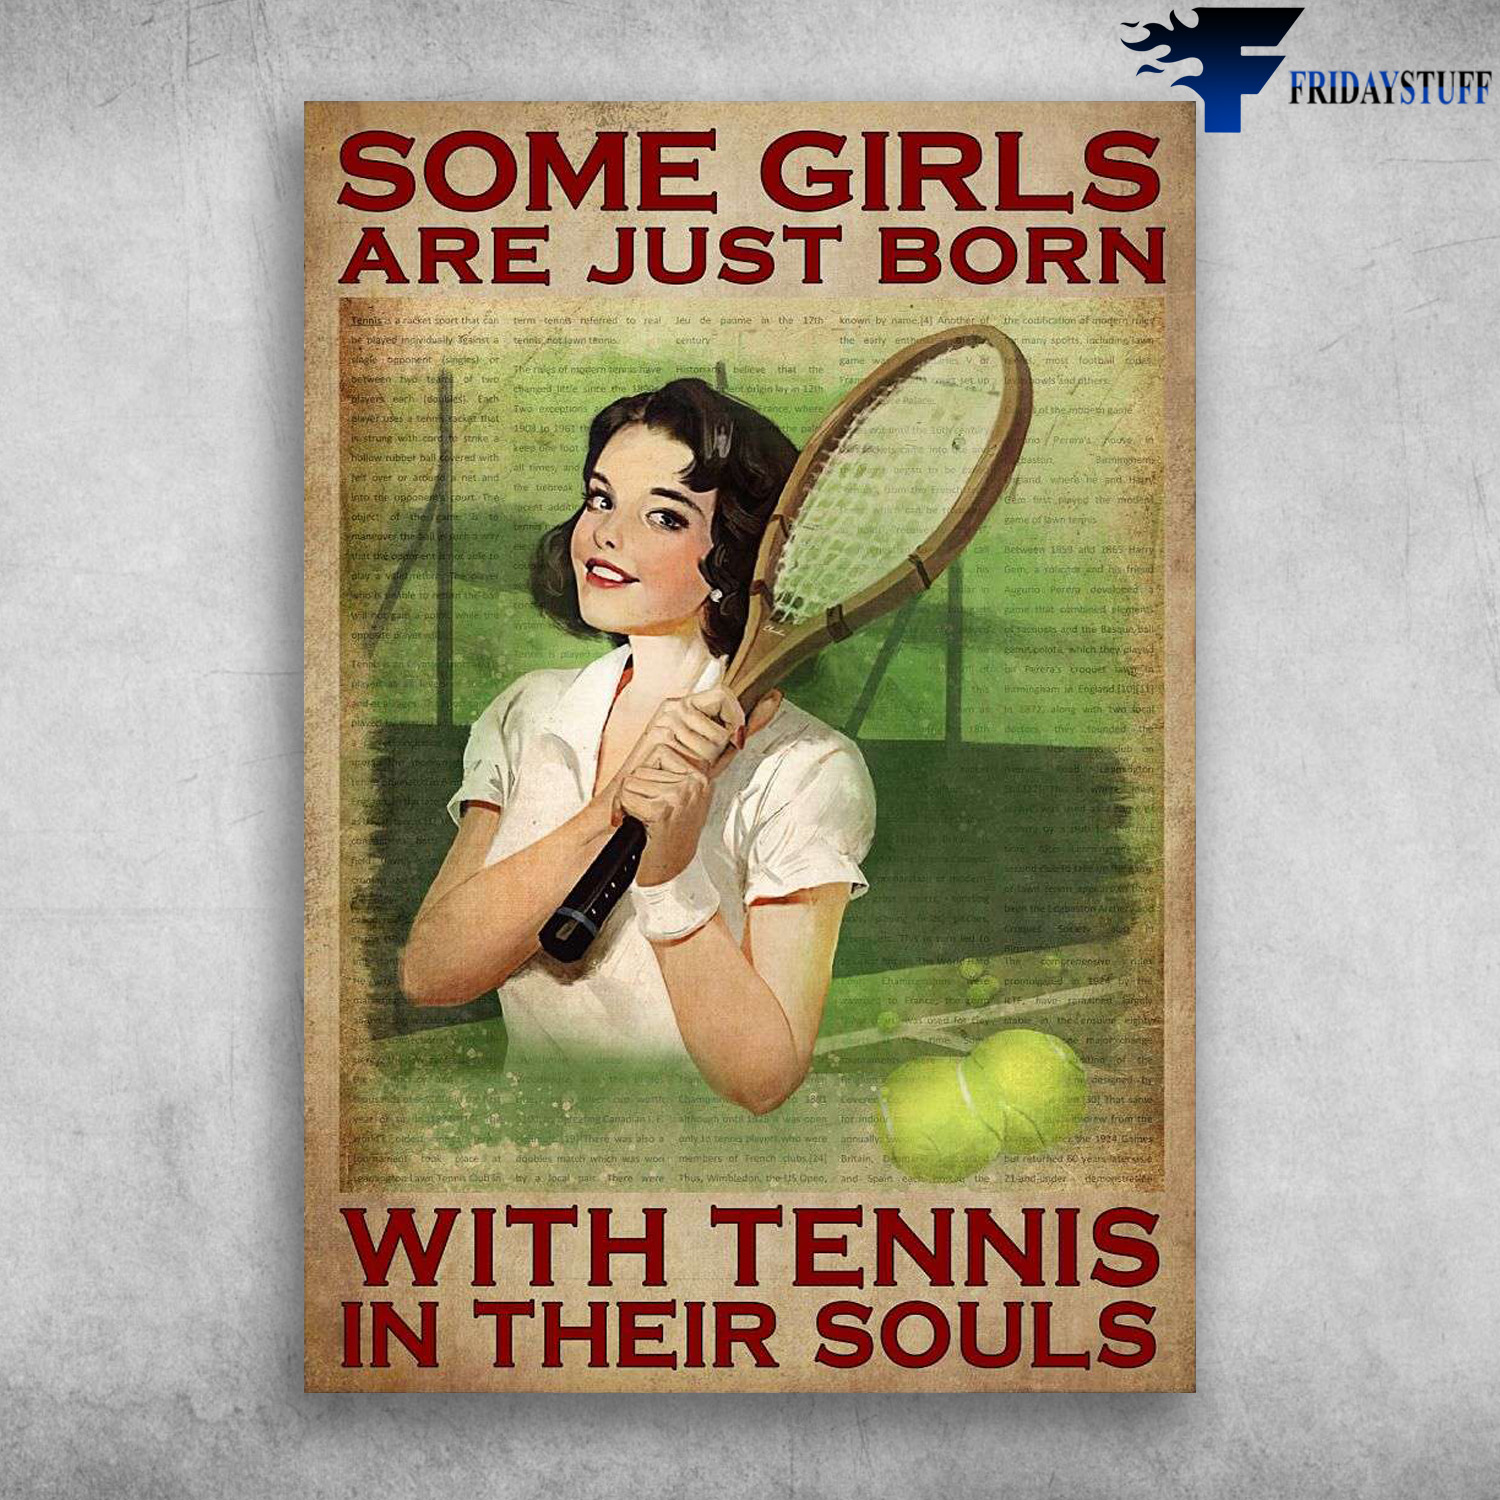 Girl Tennis, Lady Tennis Lover - Some Girls Are Just Born, With Tennis In Their Souls